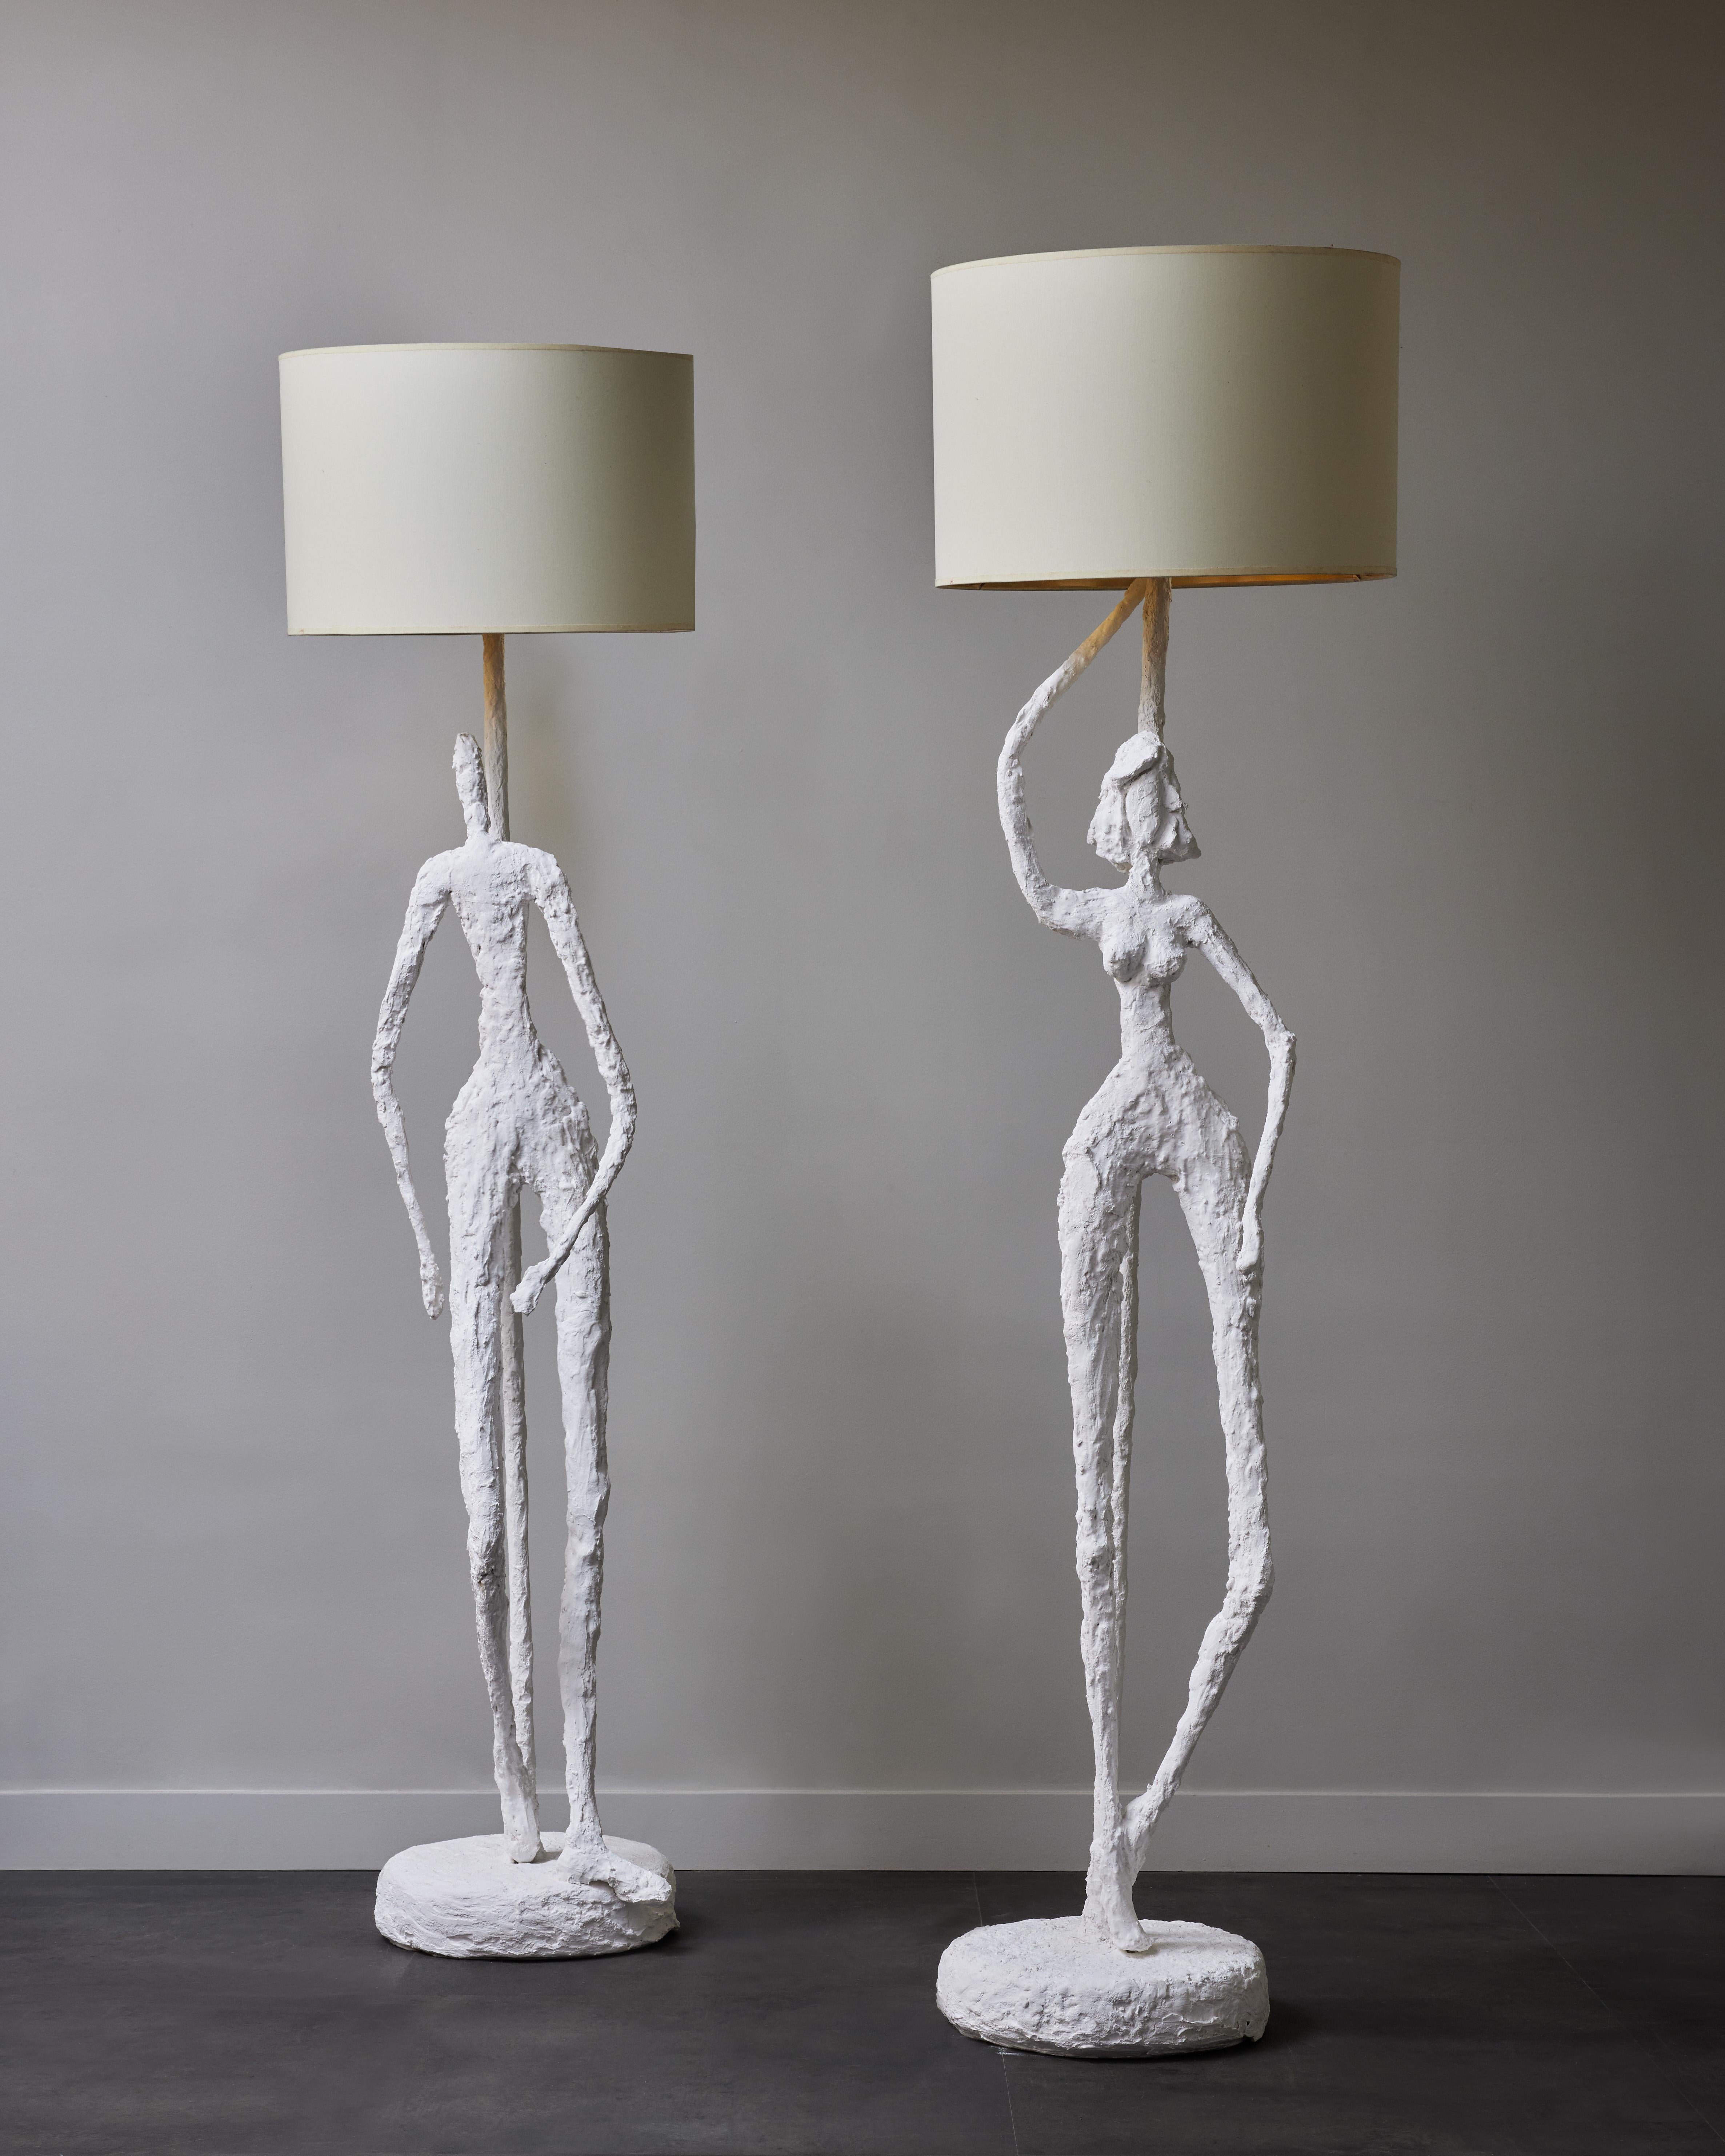 Pair of floor lamps made of a metal structure covered in plaster, and a single male and female character standing up.